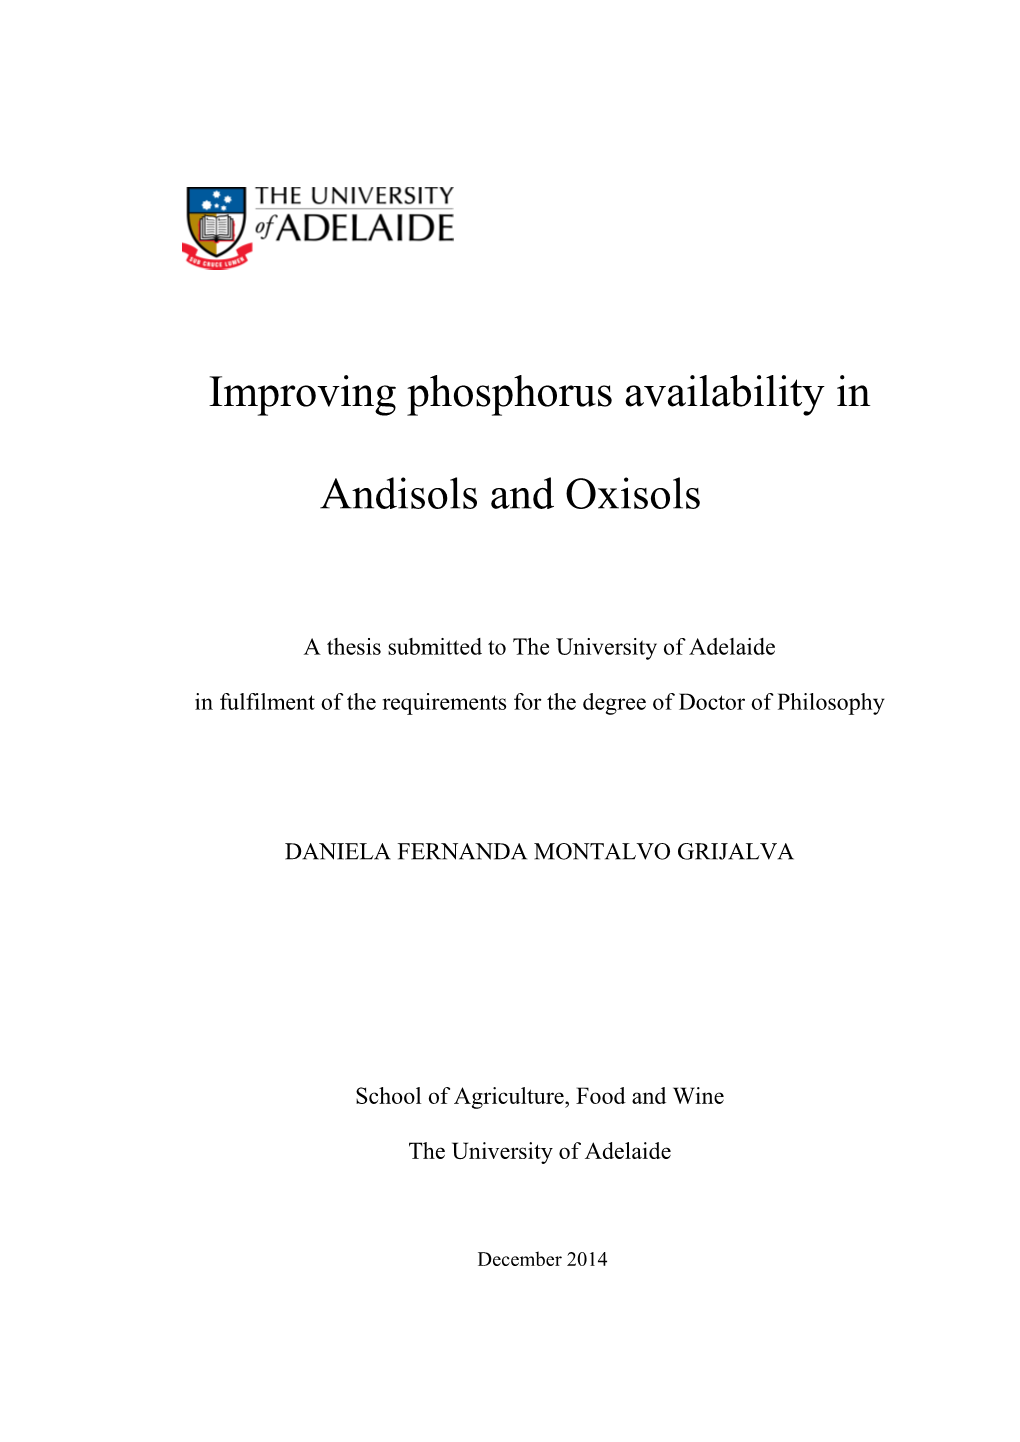 Improving Phosphorus Availability in Andisols and Oxisols